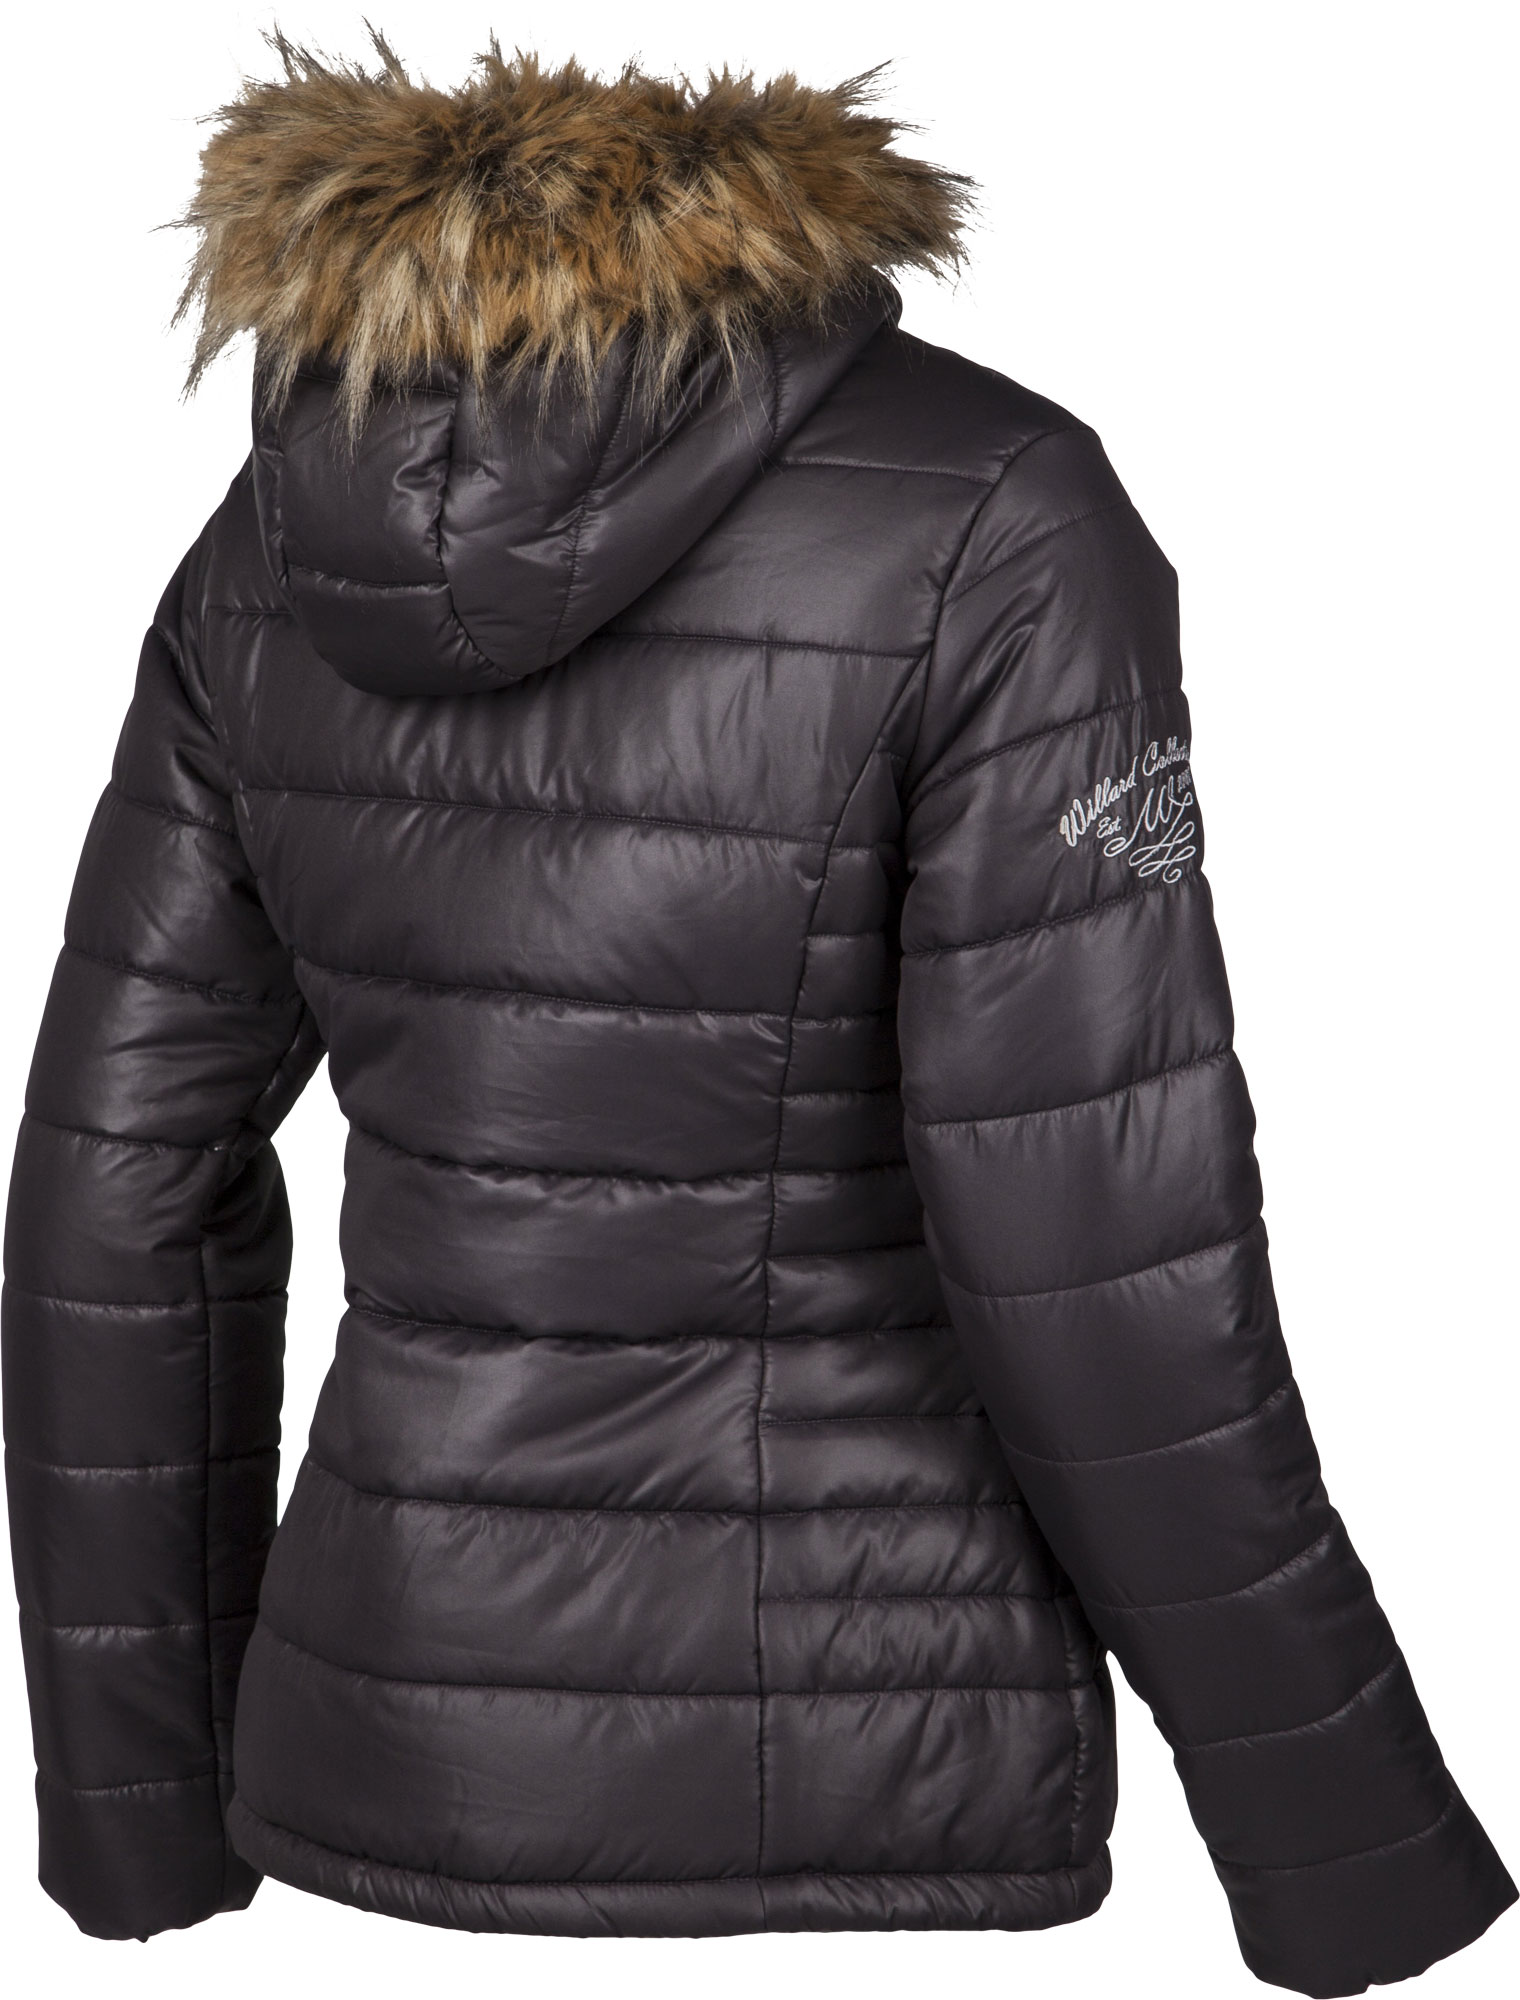 Women’s quilted jacket